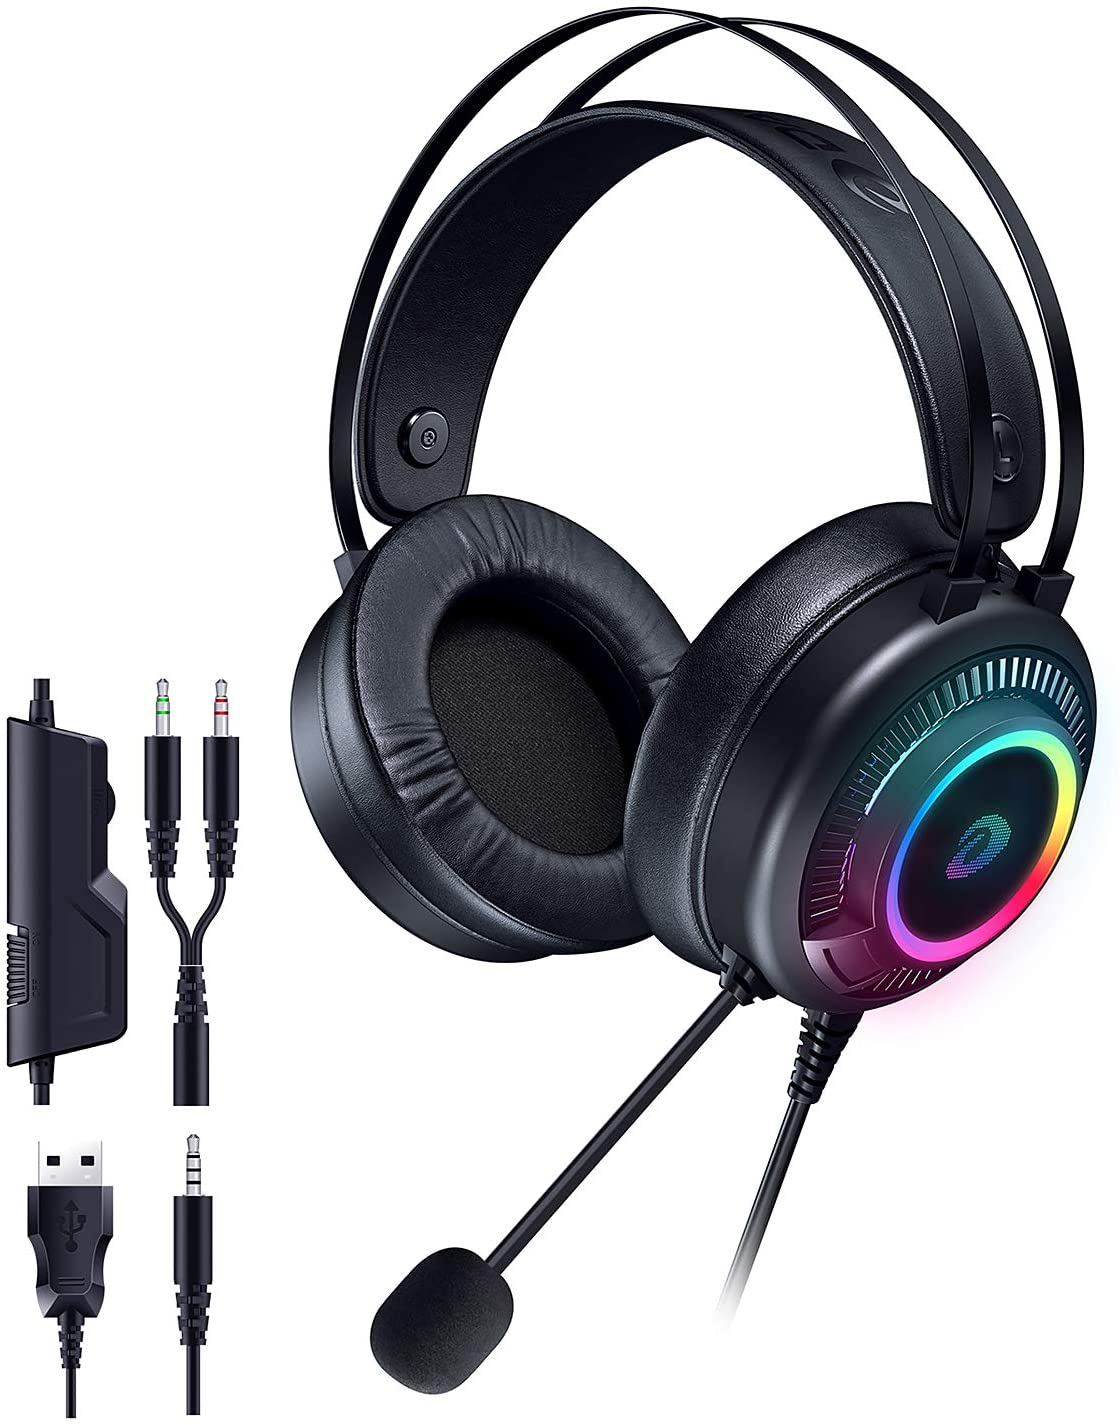 DAREU EH416 USB RGB Backlit Mirror Gaming Headset with 7.1 Surround Sound and Noise Canceling Mic - DAREU Shop